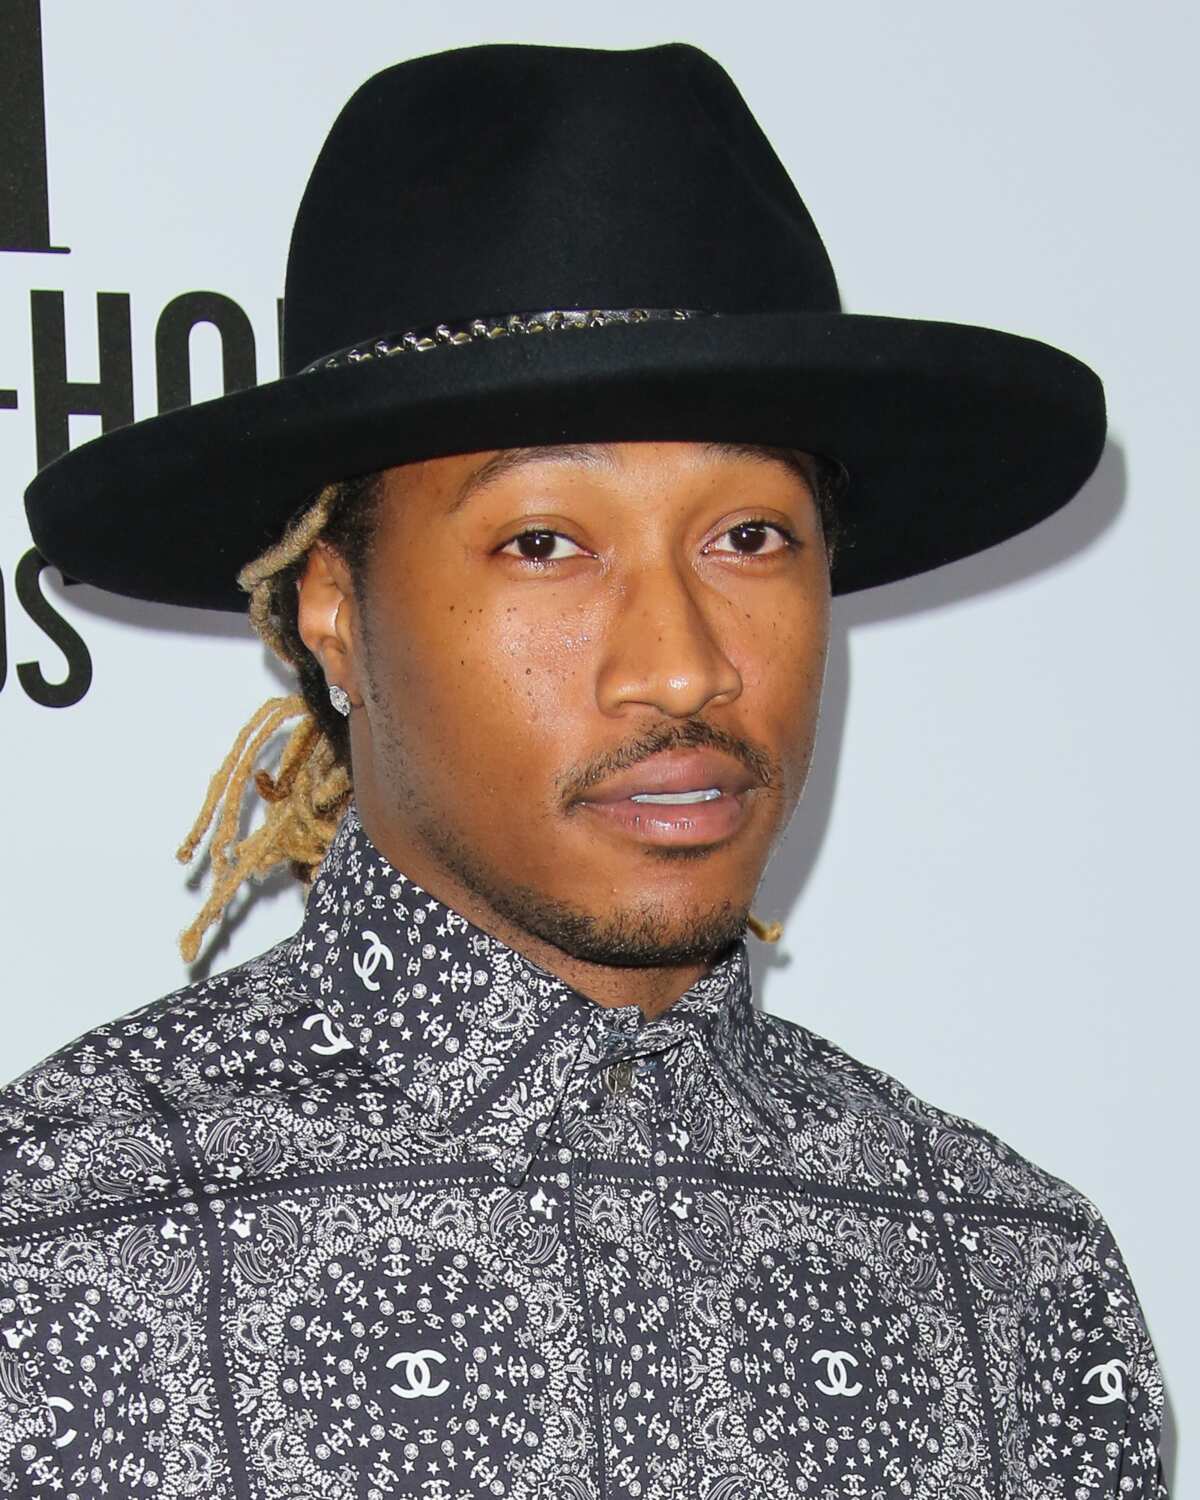 Future (rapper) biography: Age, height, albums, net worth, cars